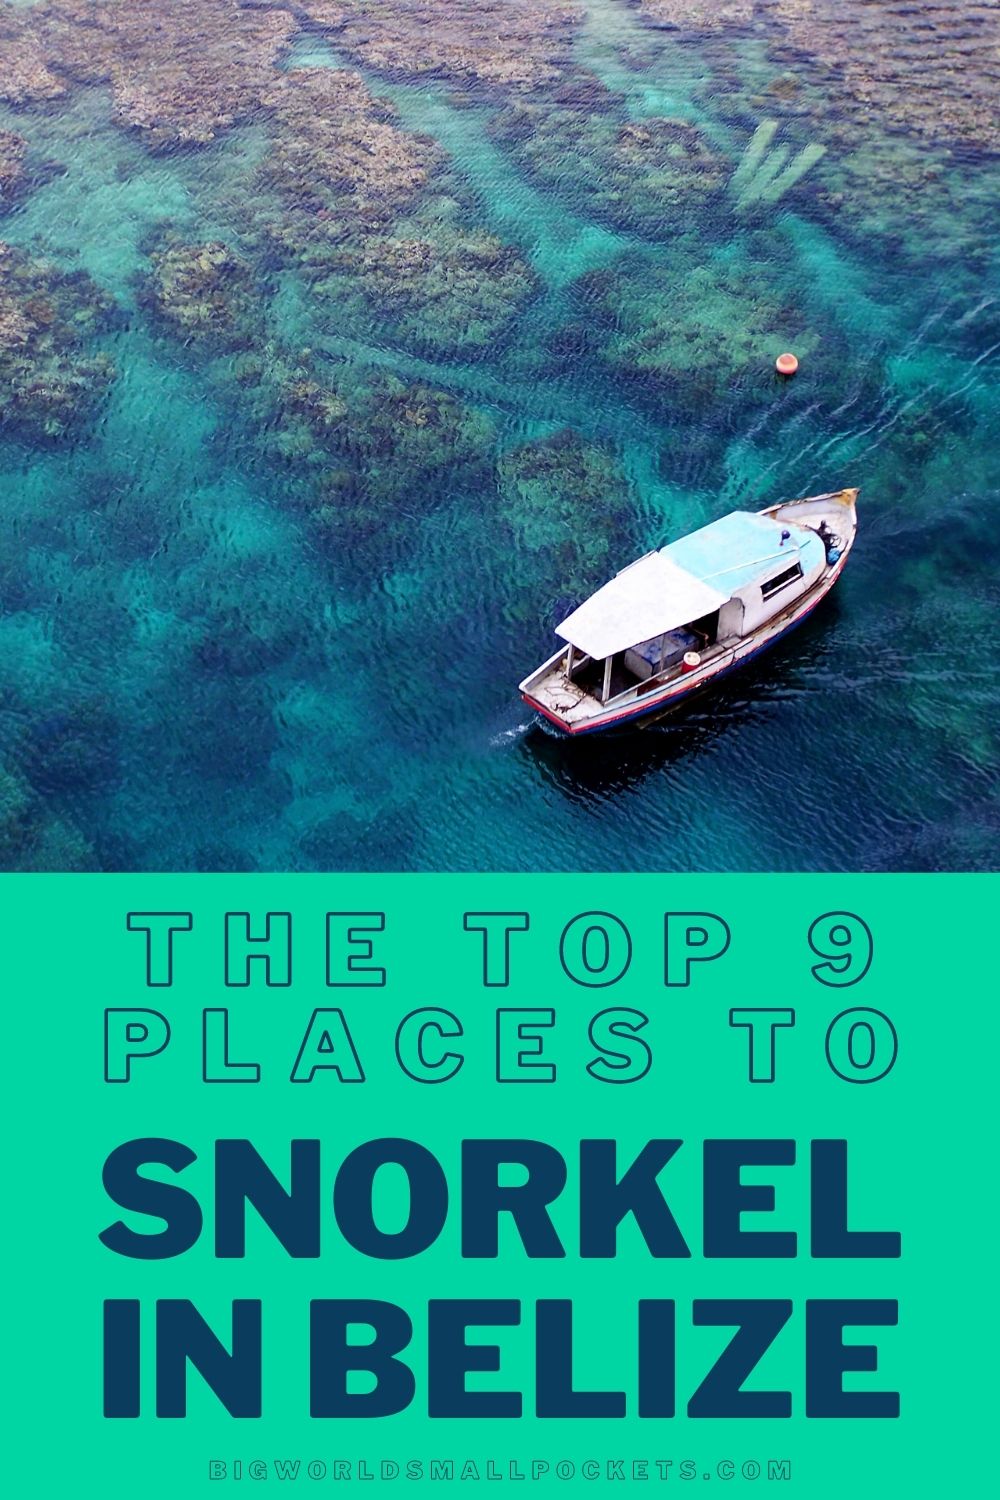 Top 9 Places to Snorkel in Belize